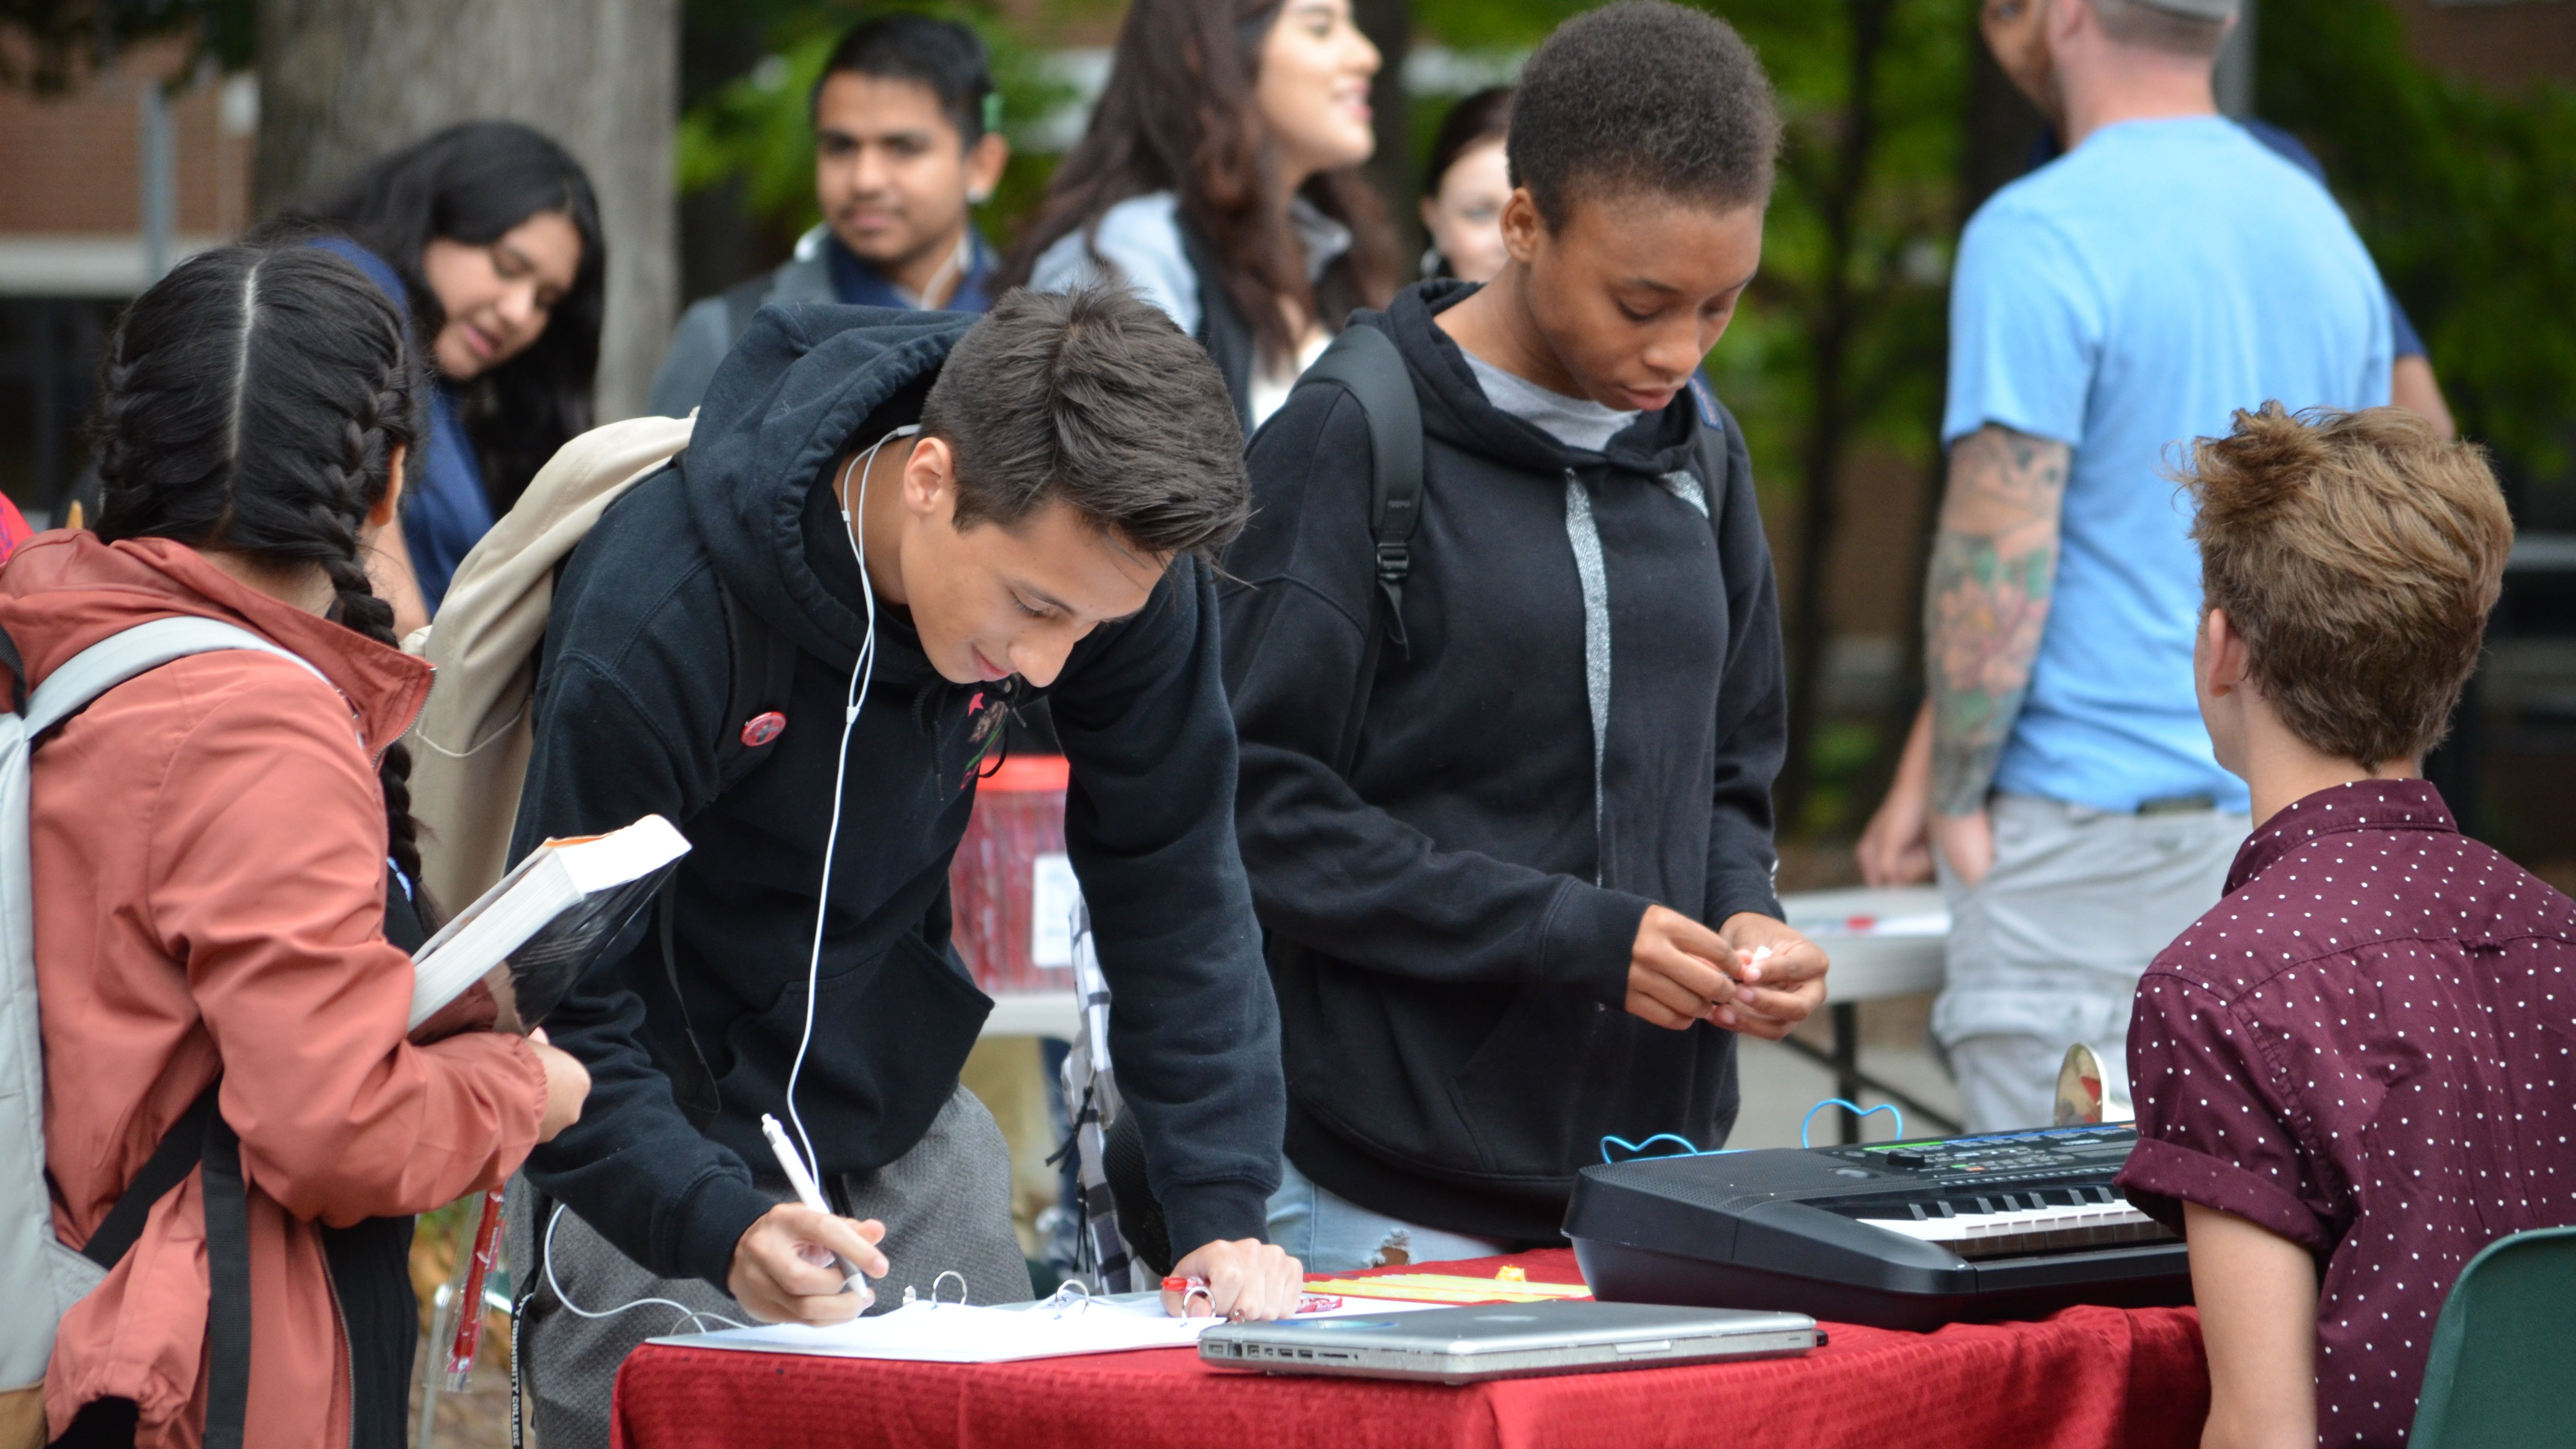 Students signing up for clubs